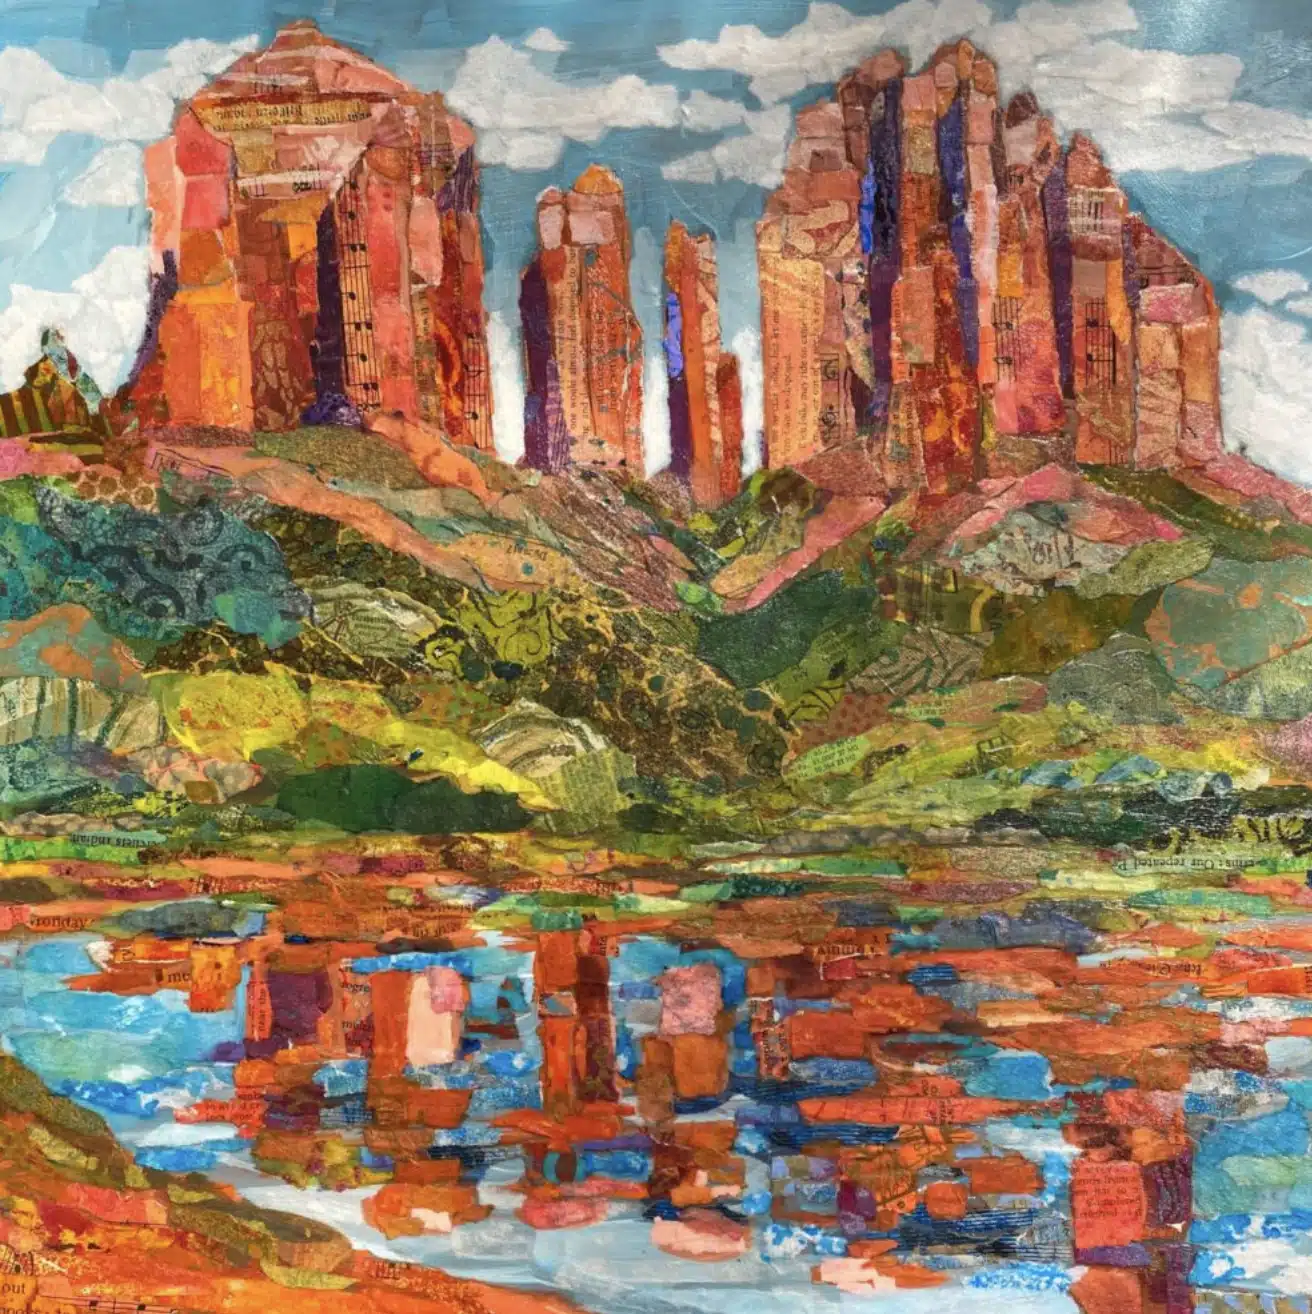 “Red Rock Crossing” by Elizabeth St. Hilaire